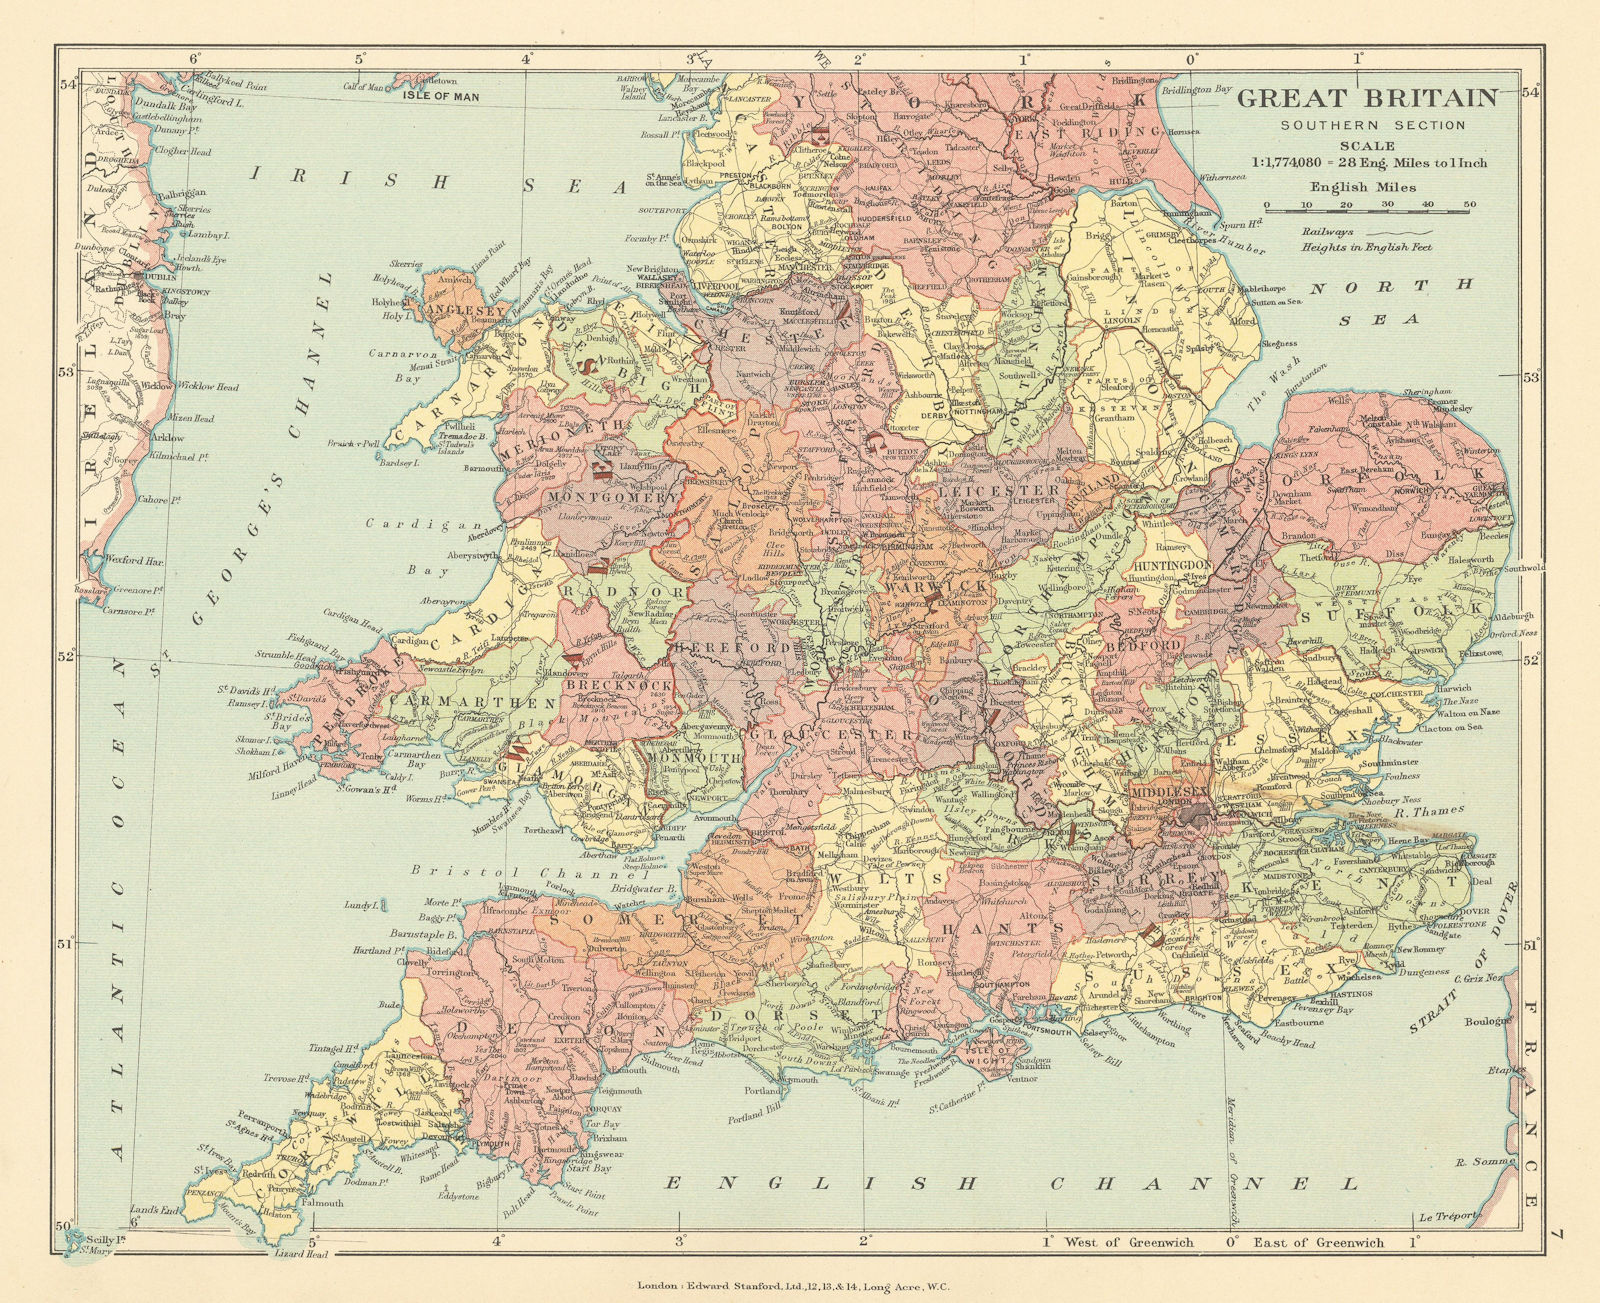 Associate Product Great Britain, Southern Section. England & Wales in counties. STANFORD c1925 map